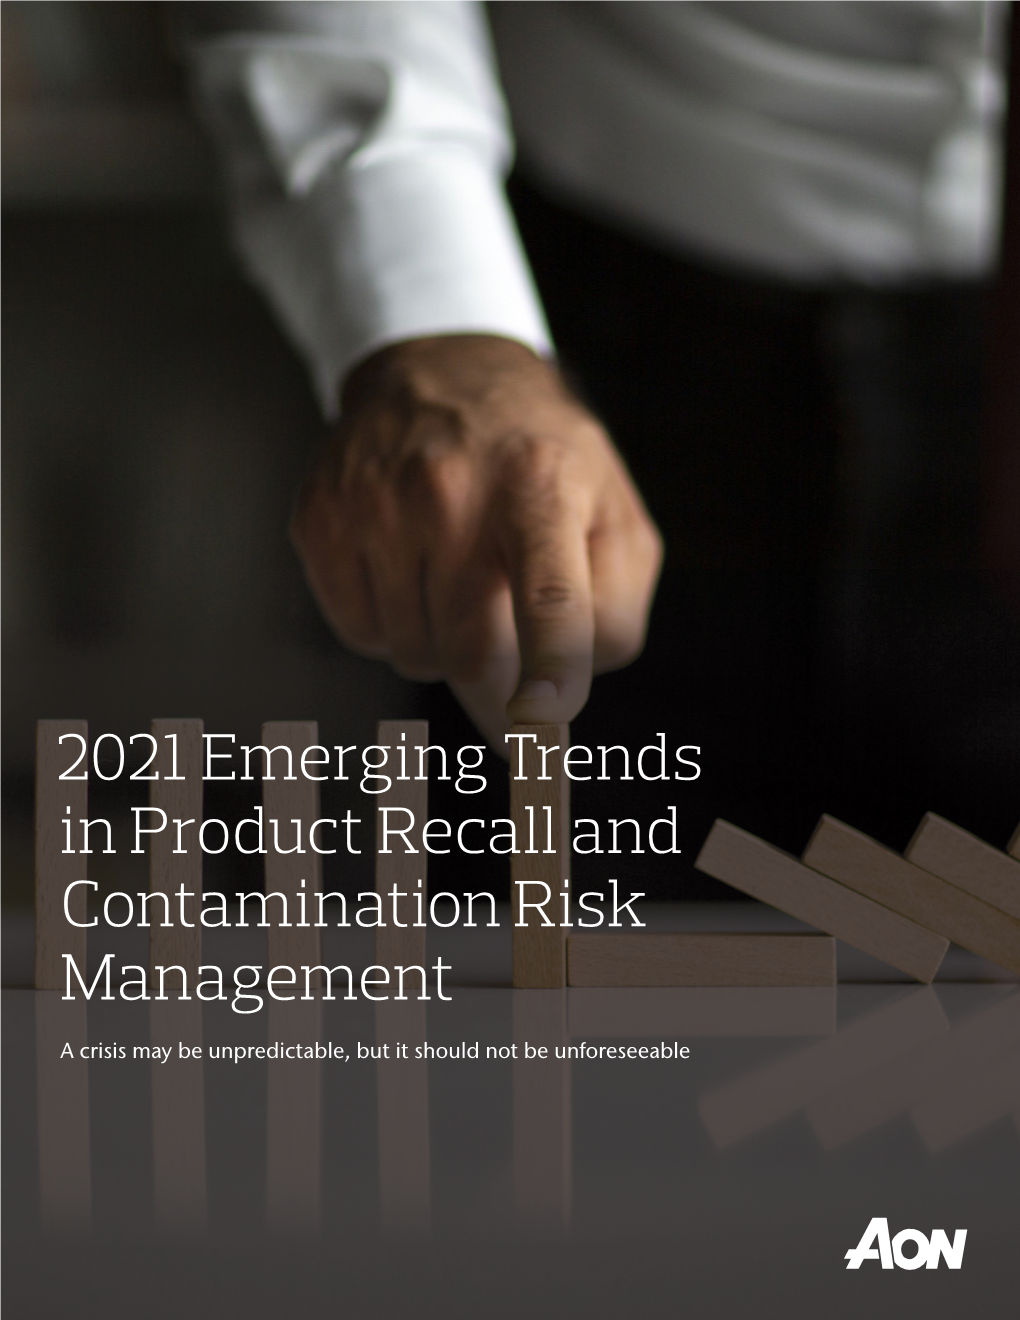 2021 Emerging Trends in Product Recall and Contamination Risk Management